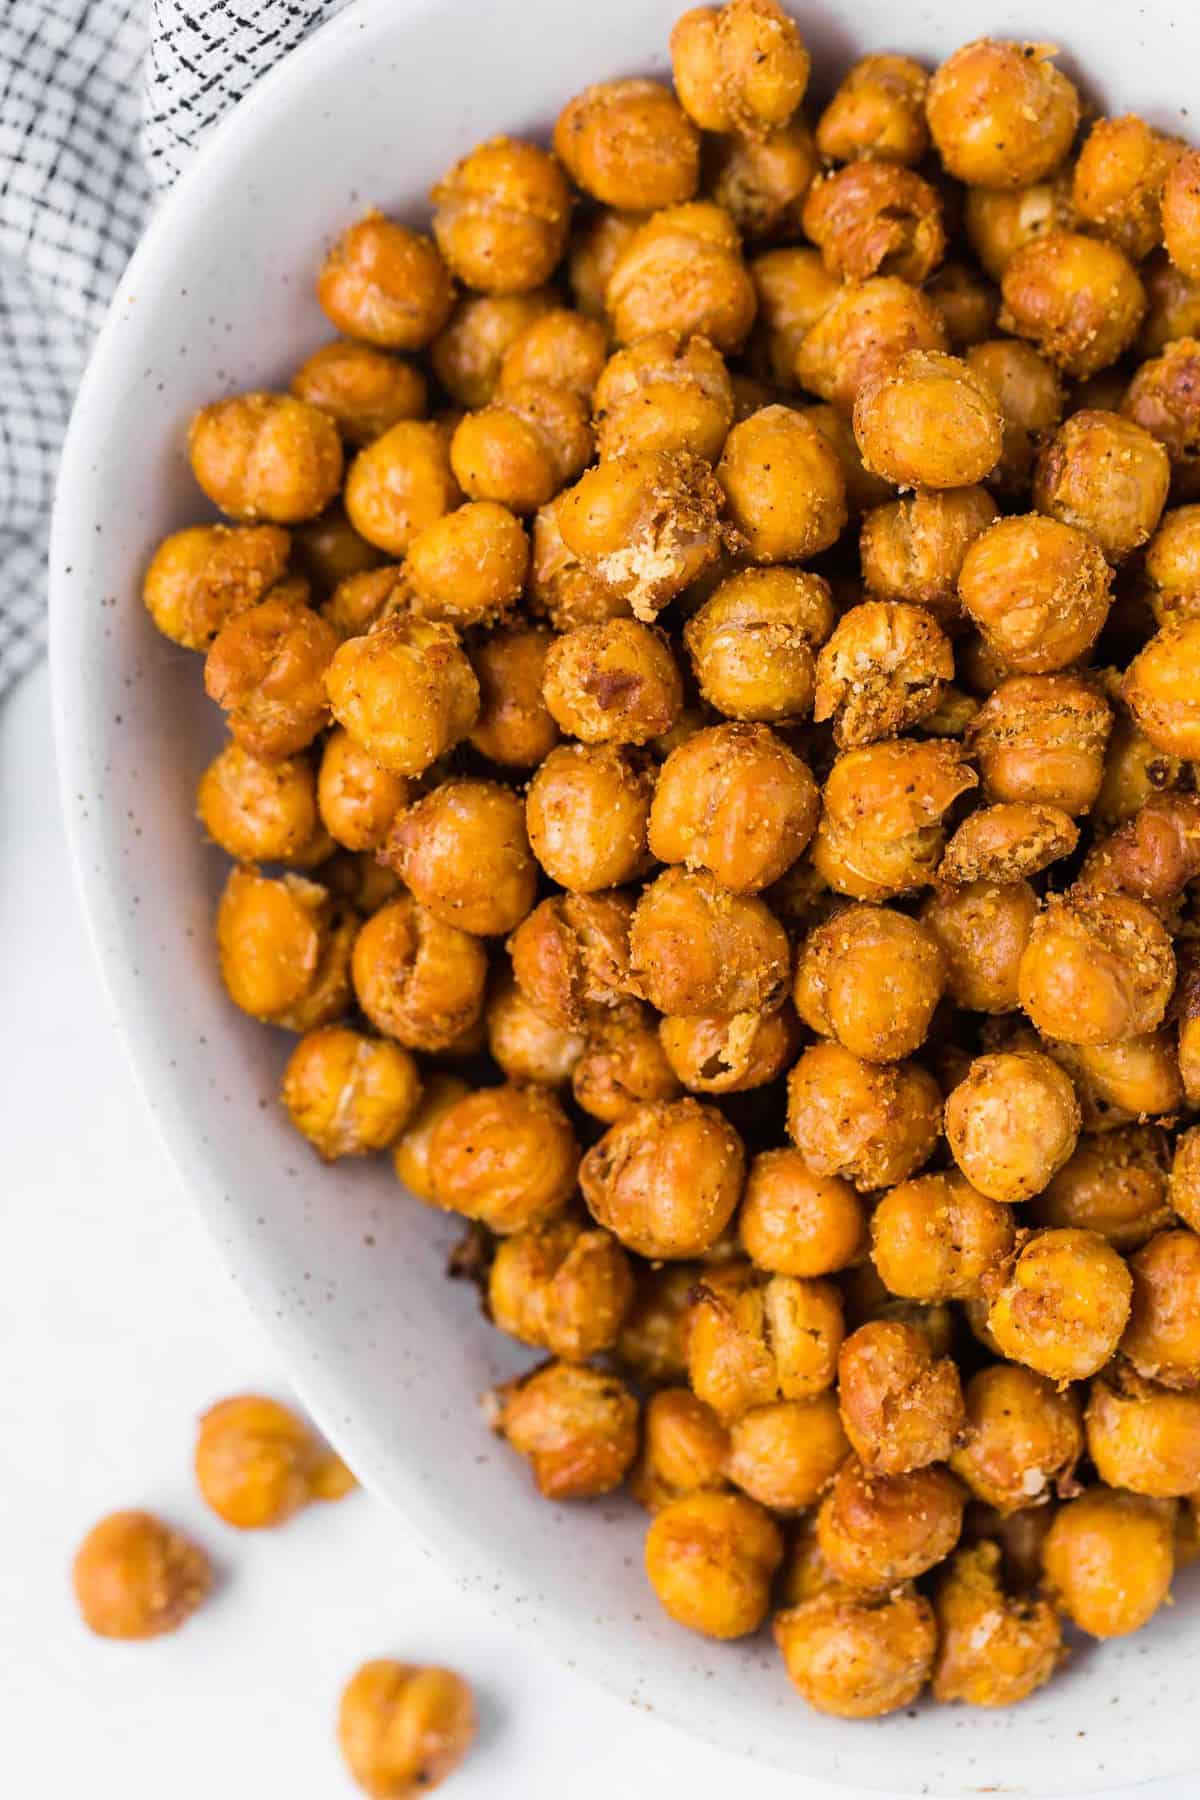 Crispy chickpeas in a white bowl, overhead view.